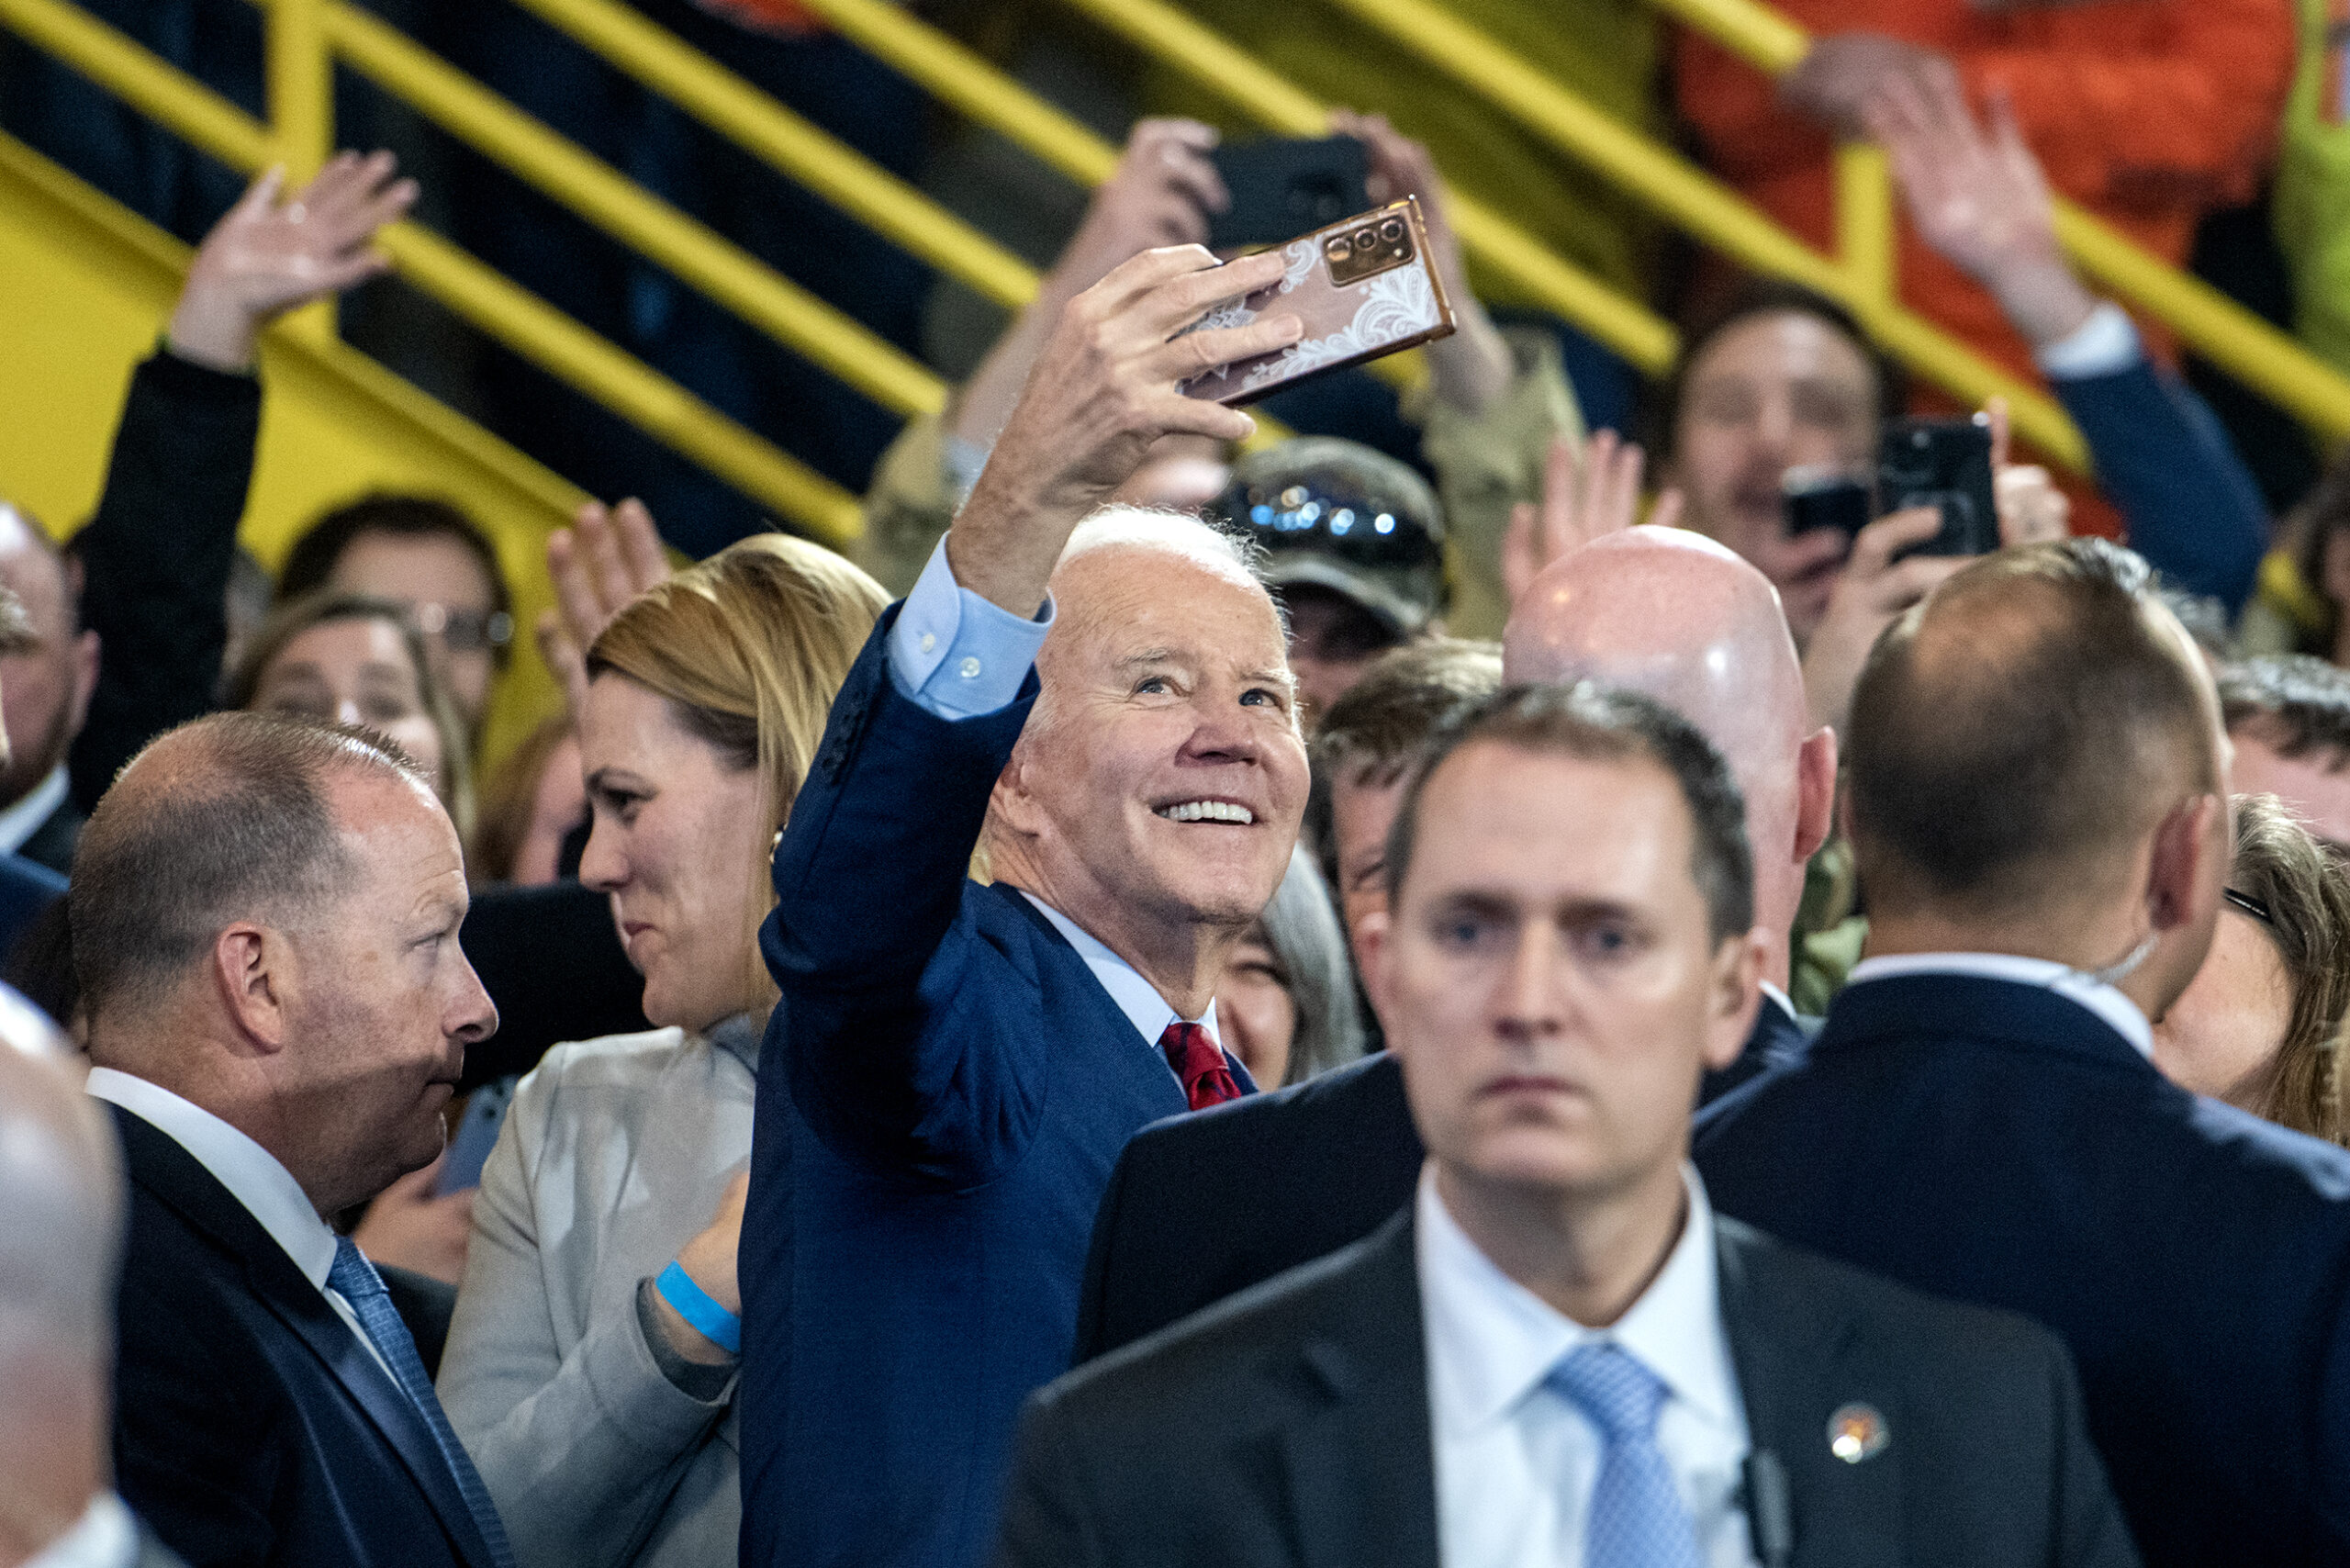 President Joe Biden holds a phone in the air while smiling and taking a selfie.